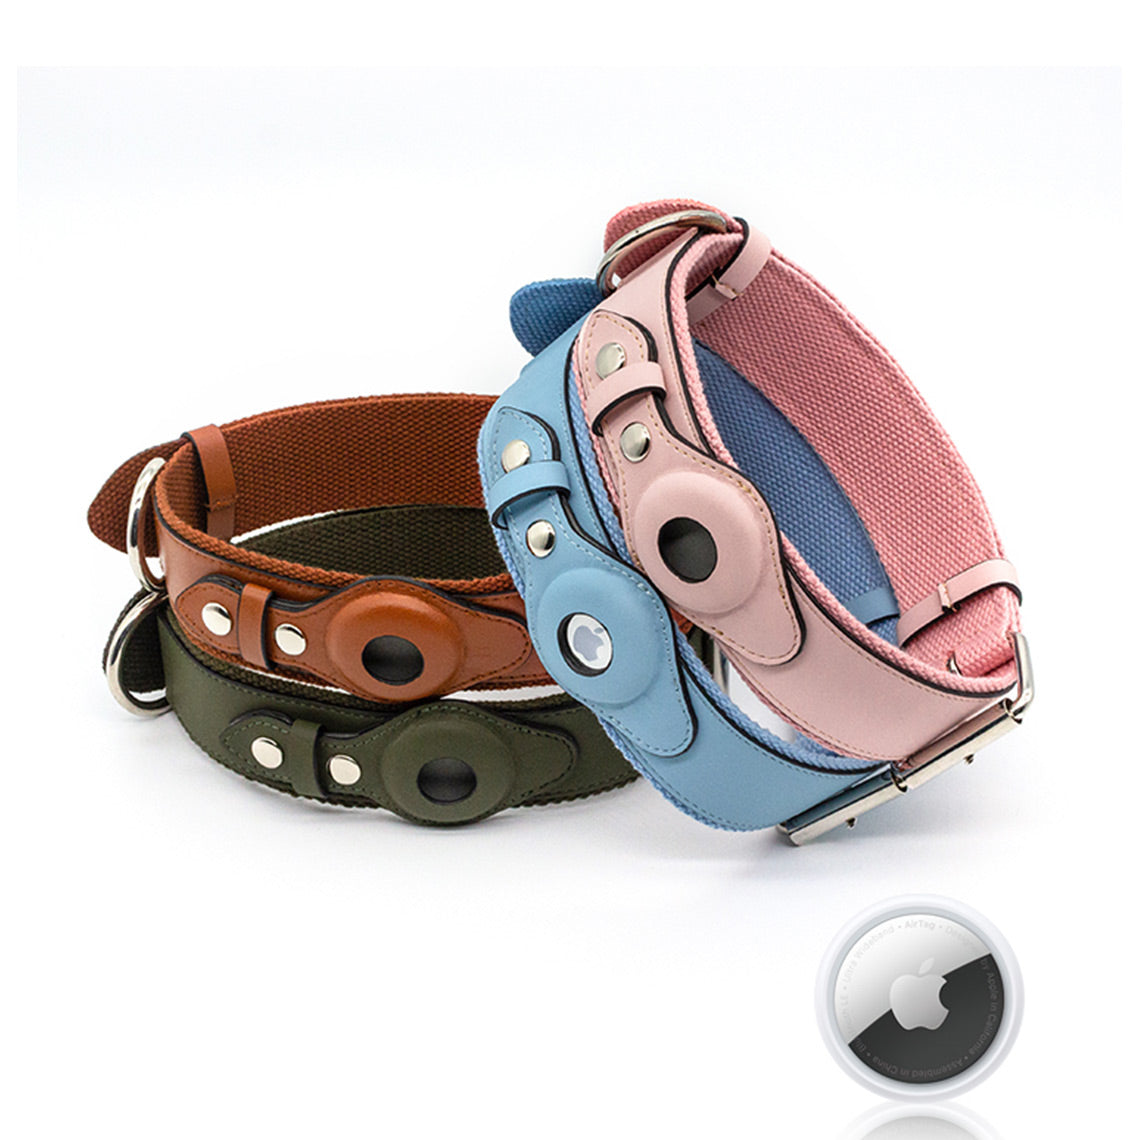 Leather dog collar with airtag case | Best dog collar for small dog